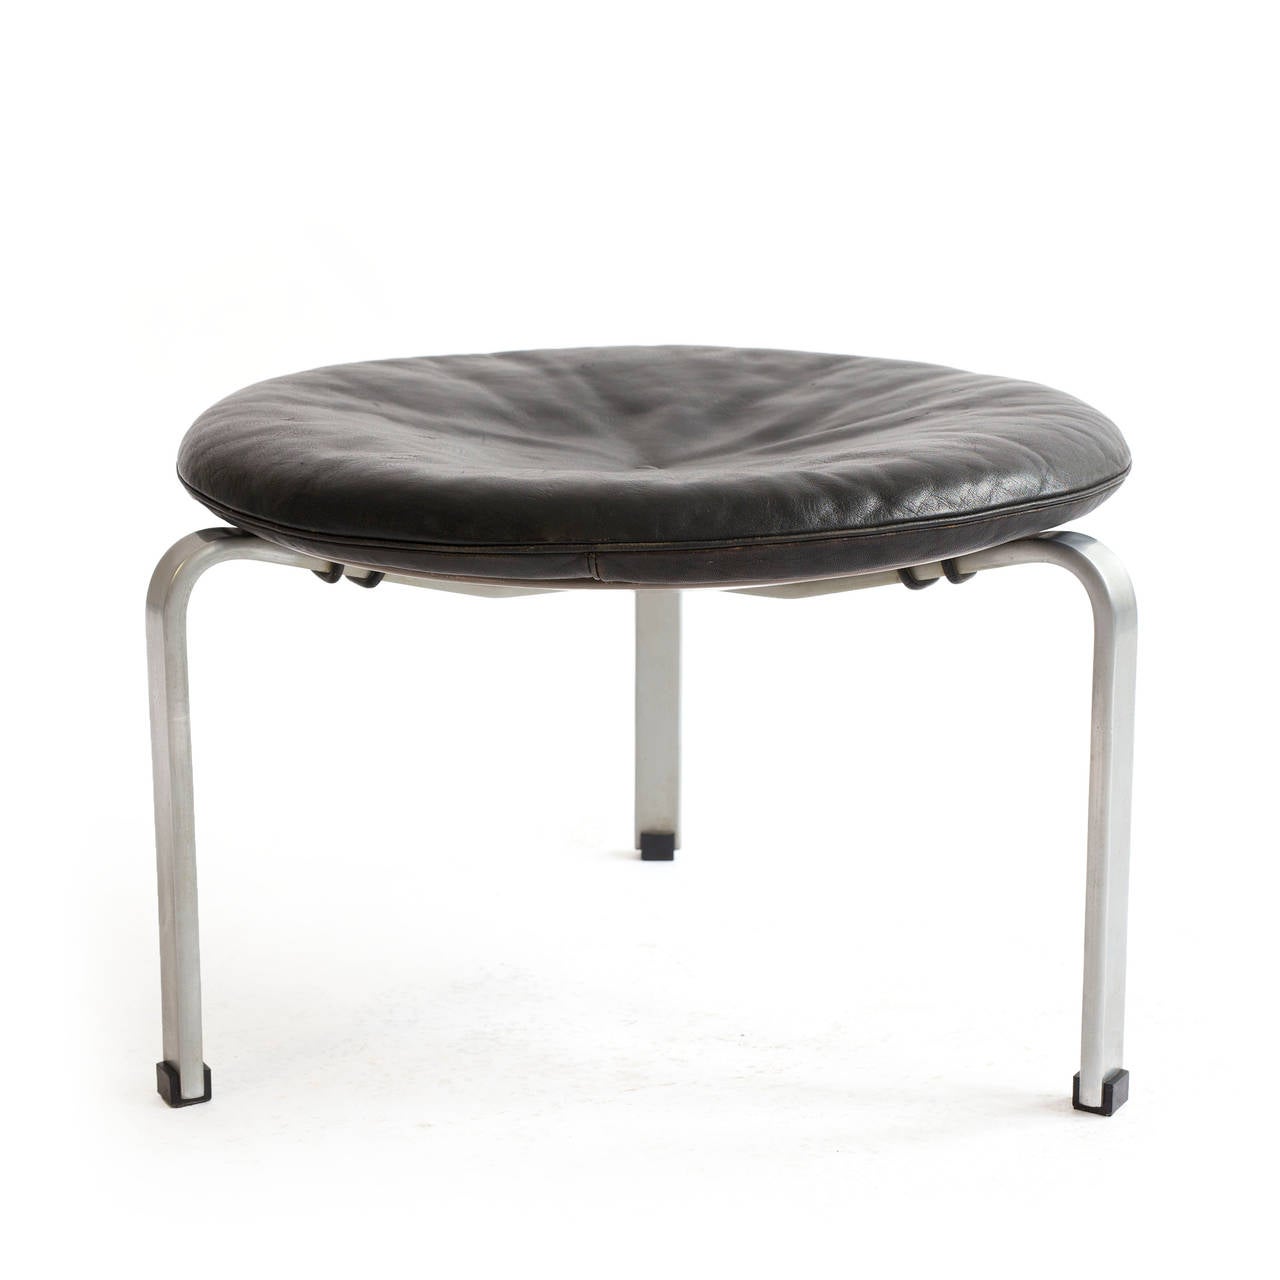 Poul Kjærholm stool model 'PK 33,' steel frame and cushion of original black leather. 

Designed 1958, manufactured and marked by E. Kold Christensen.

Fine condition and patina.